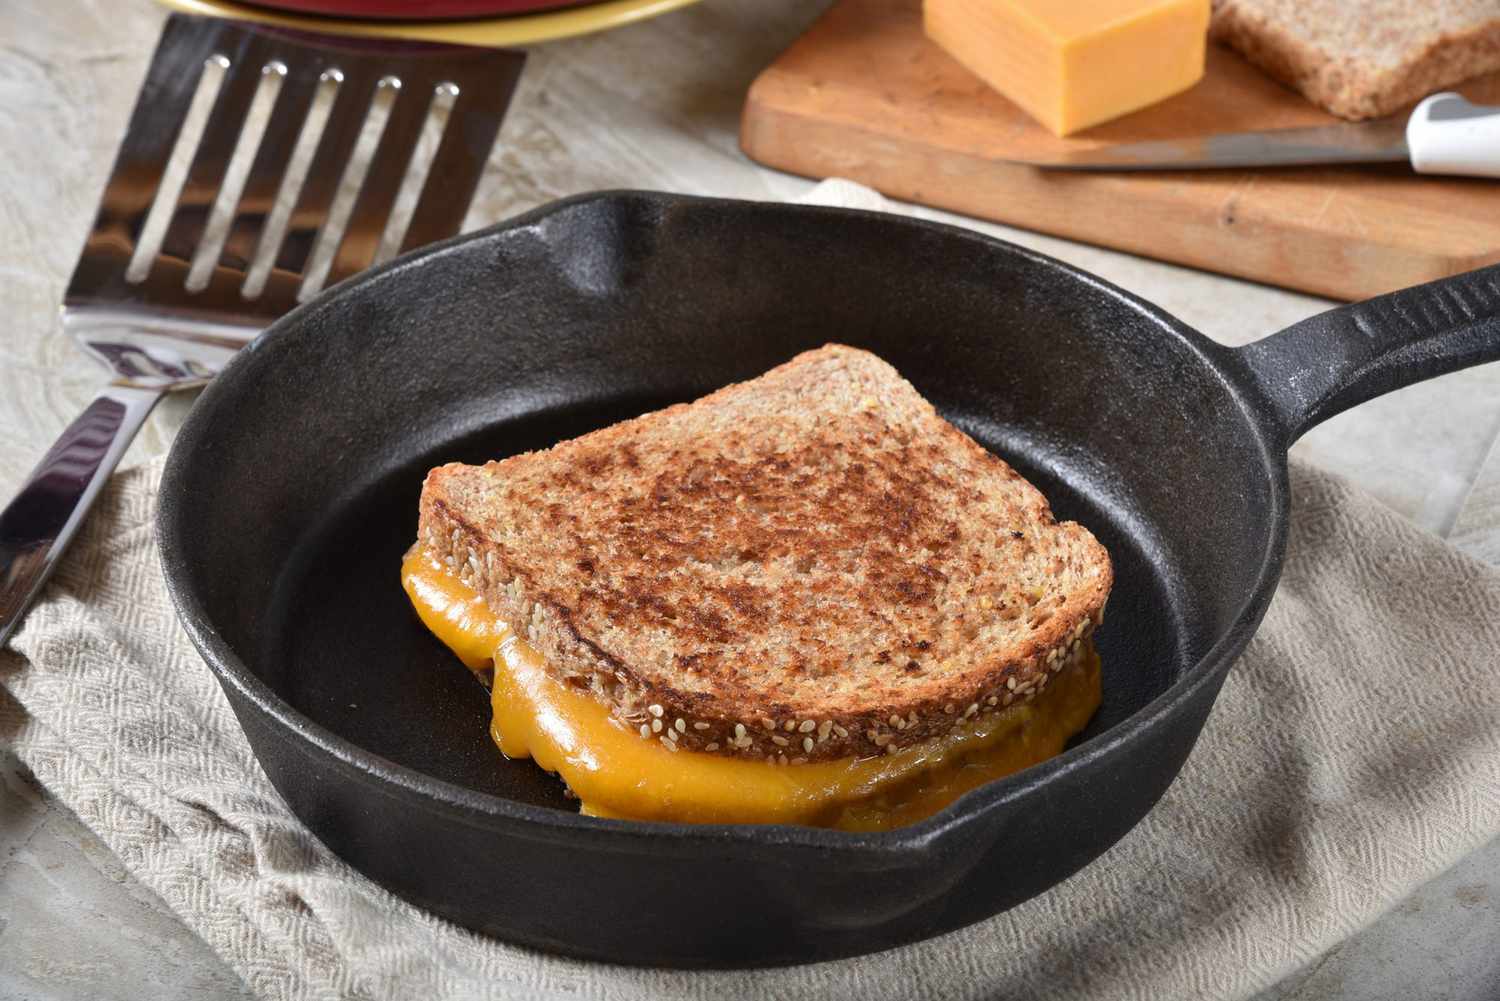 Grilled cheese sandwich in a cast iron skillet